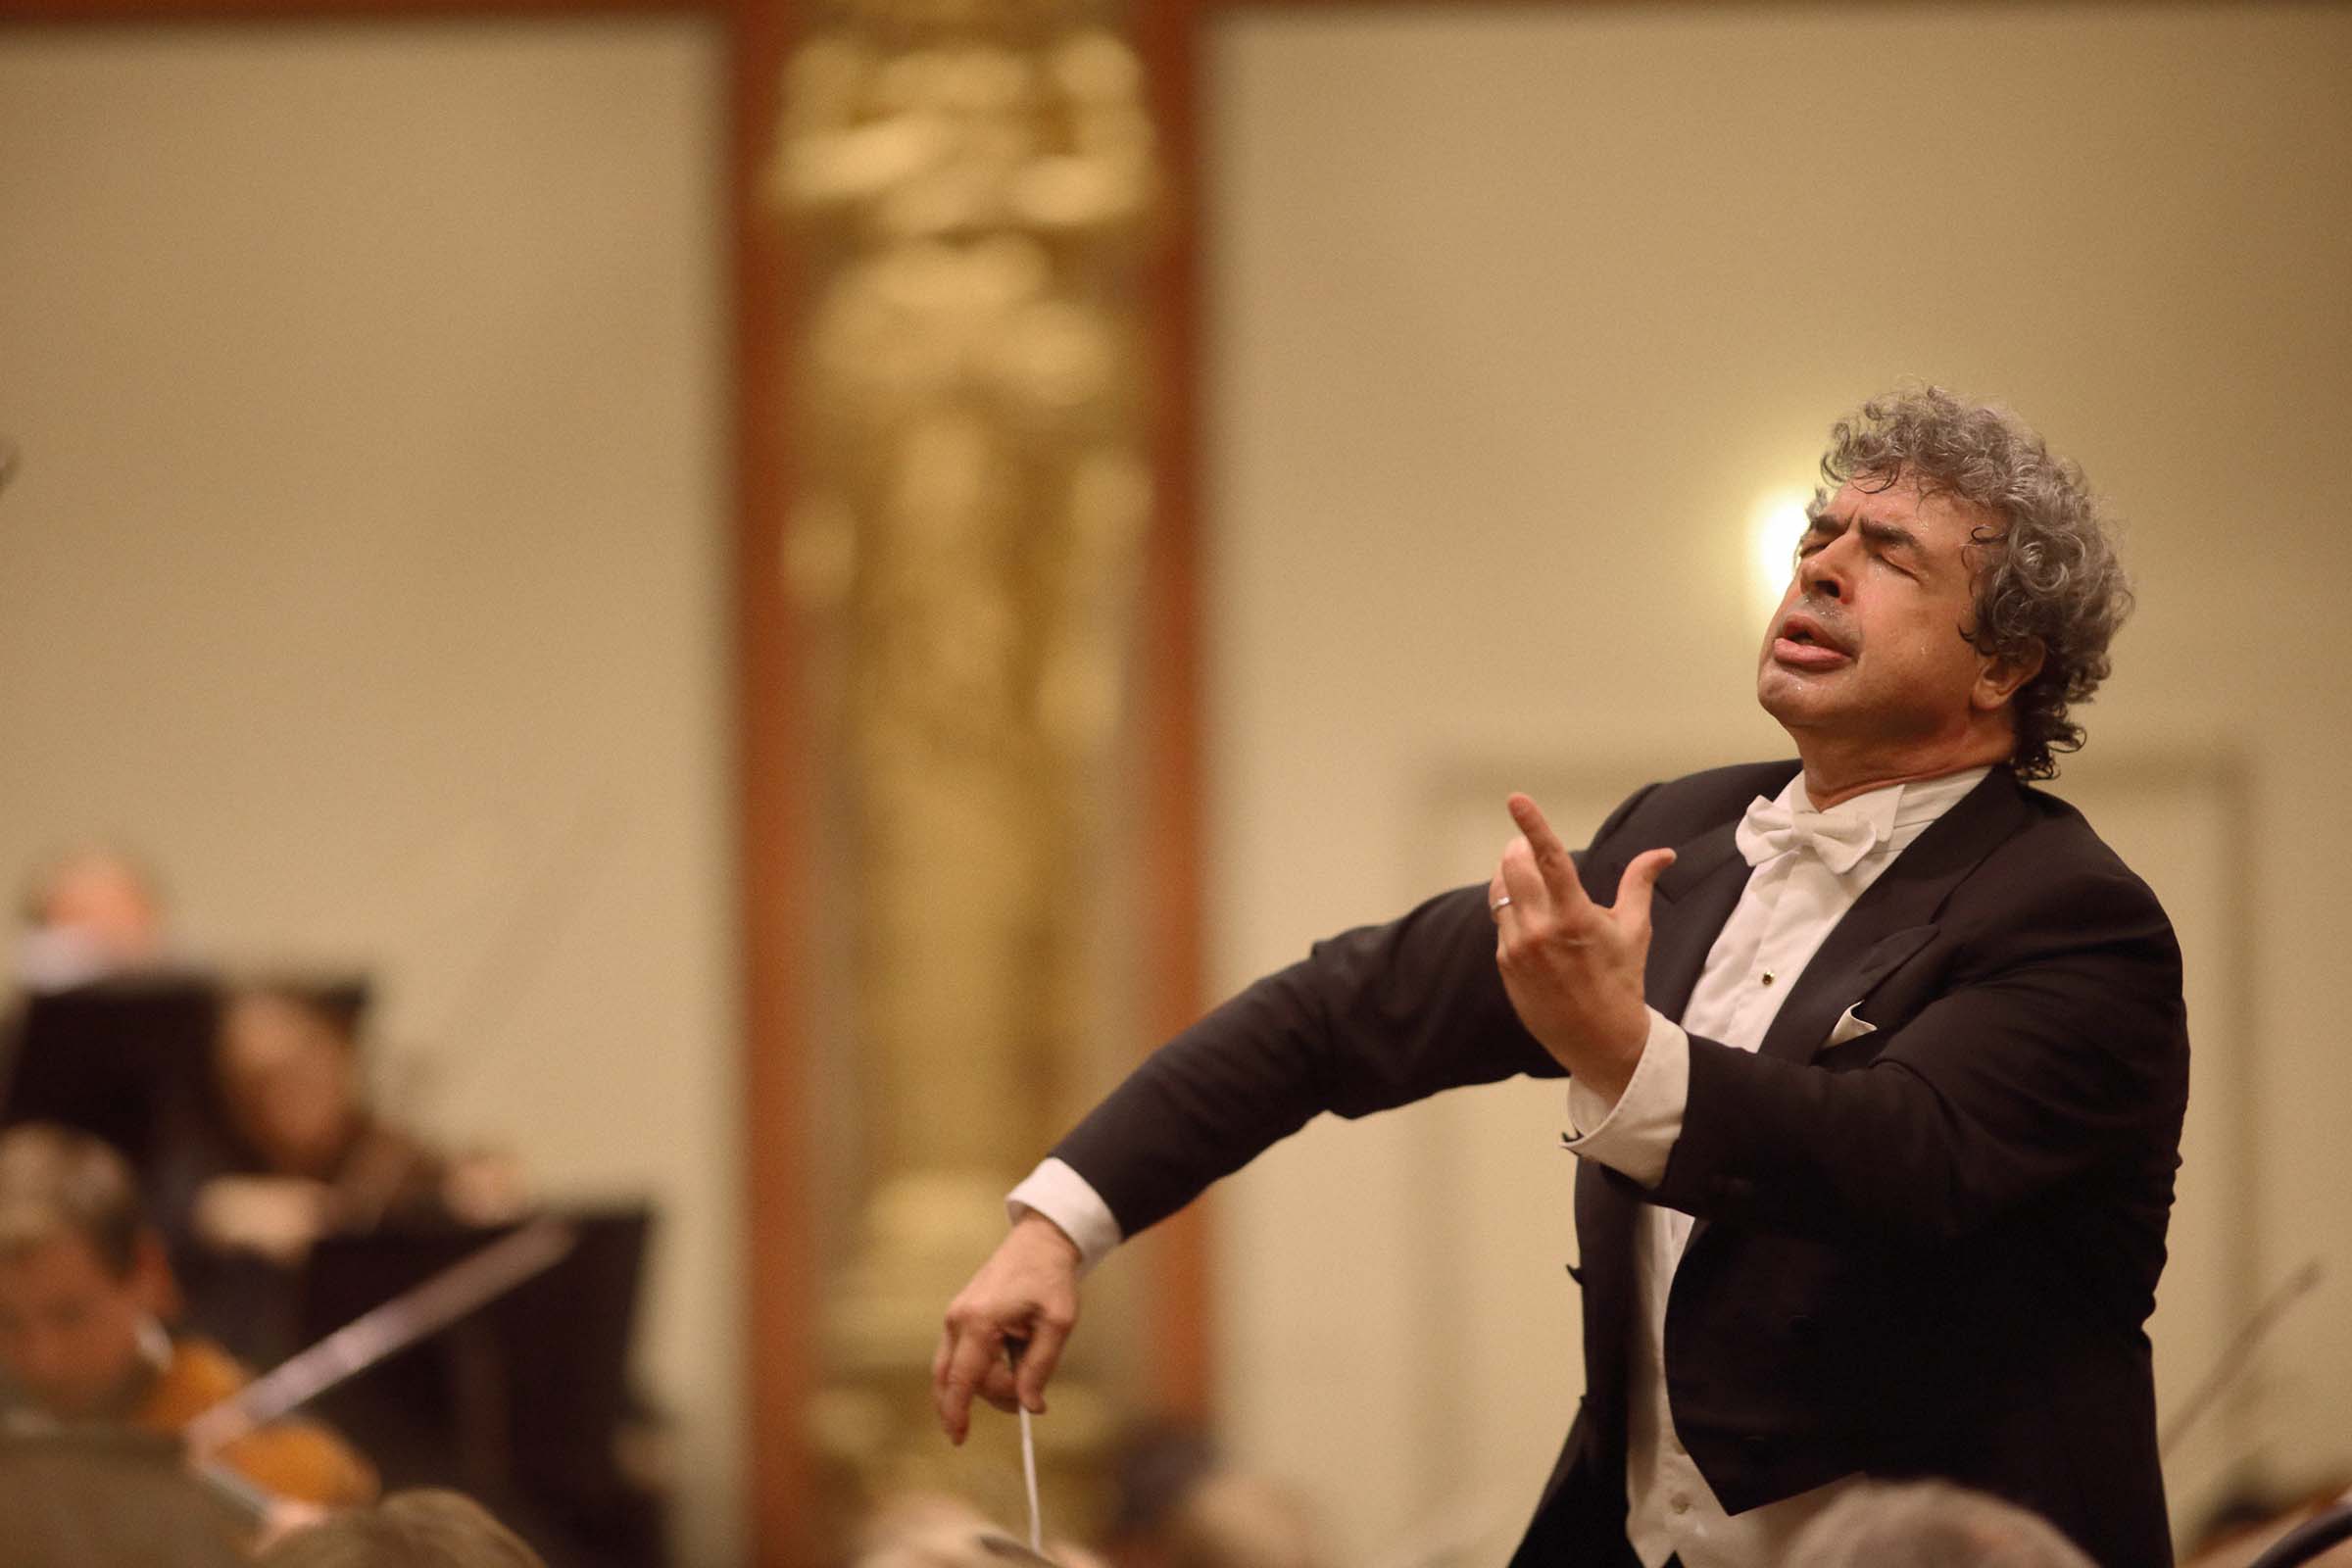 Bychkov conducts with his eyes closed.